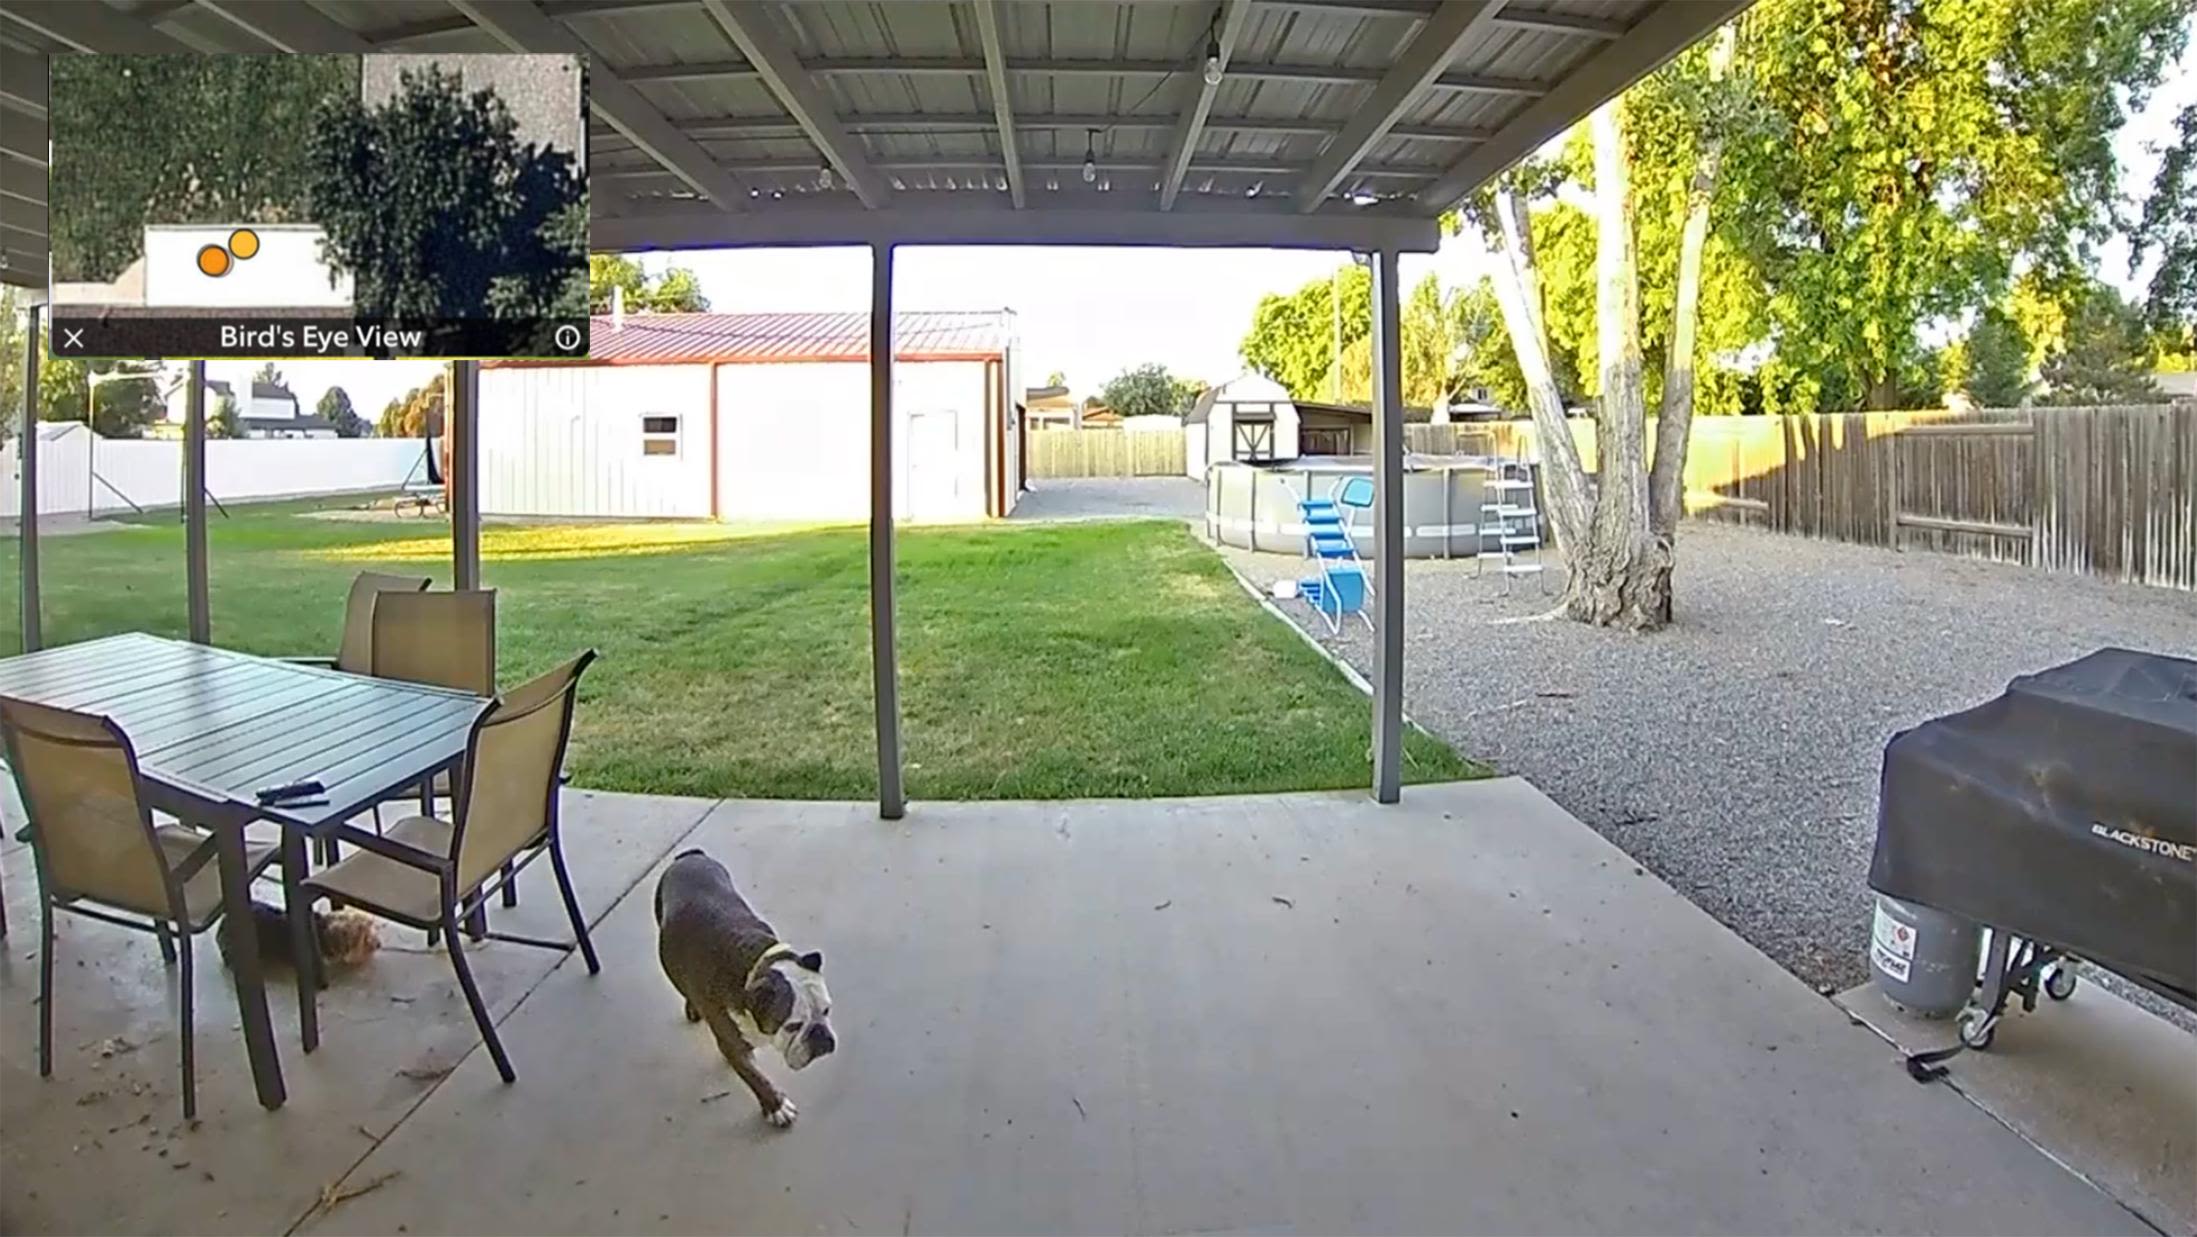 Video Doorbell Footage that Is Admissible in Court